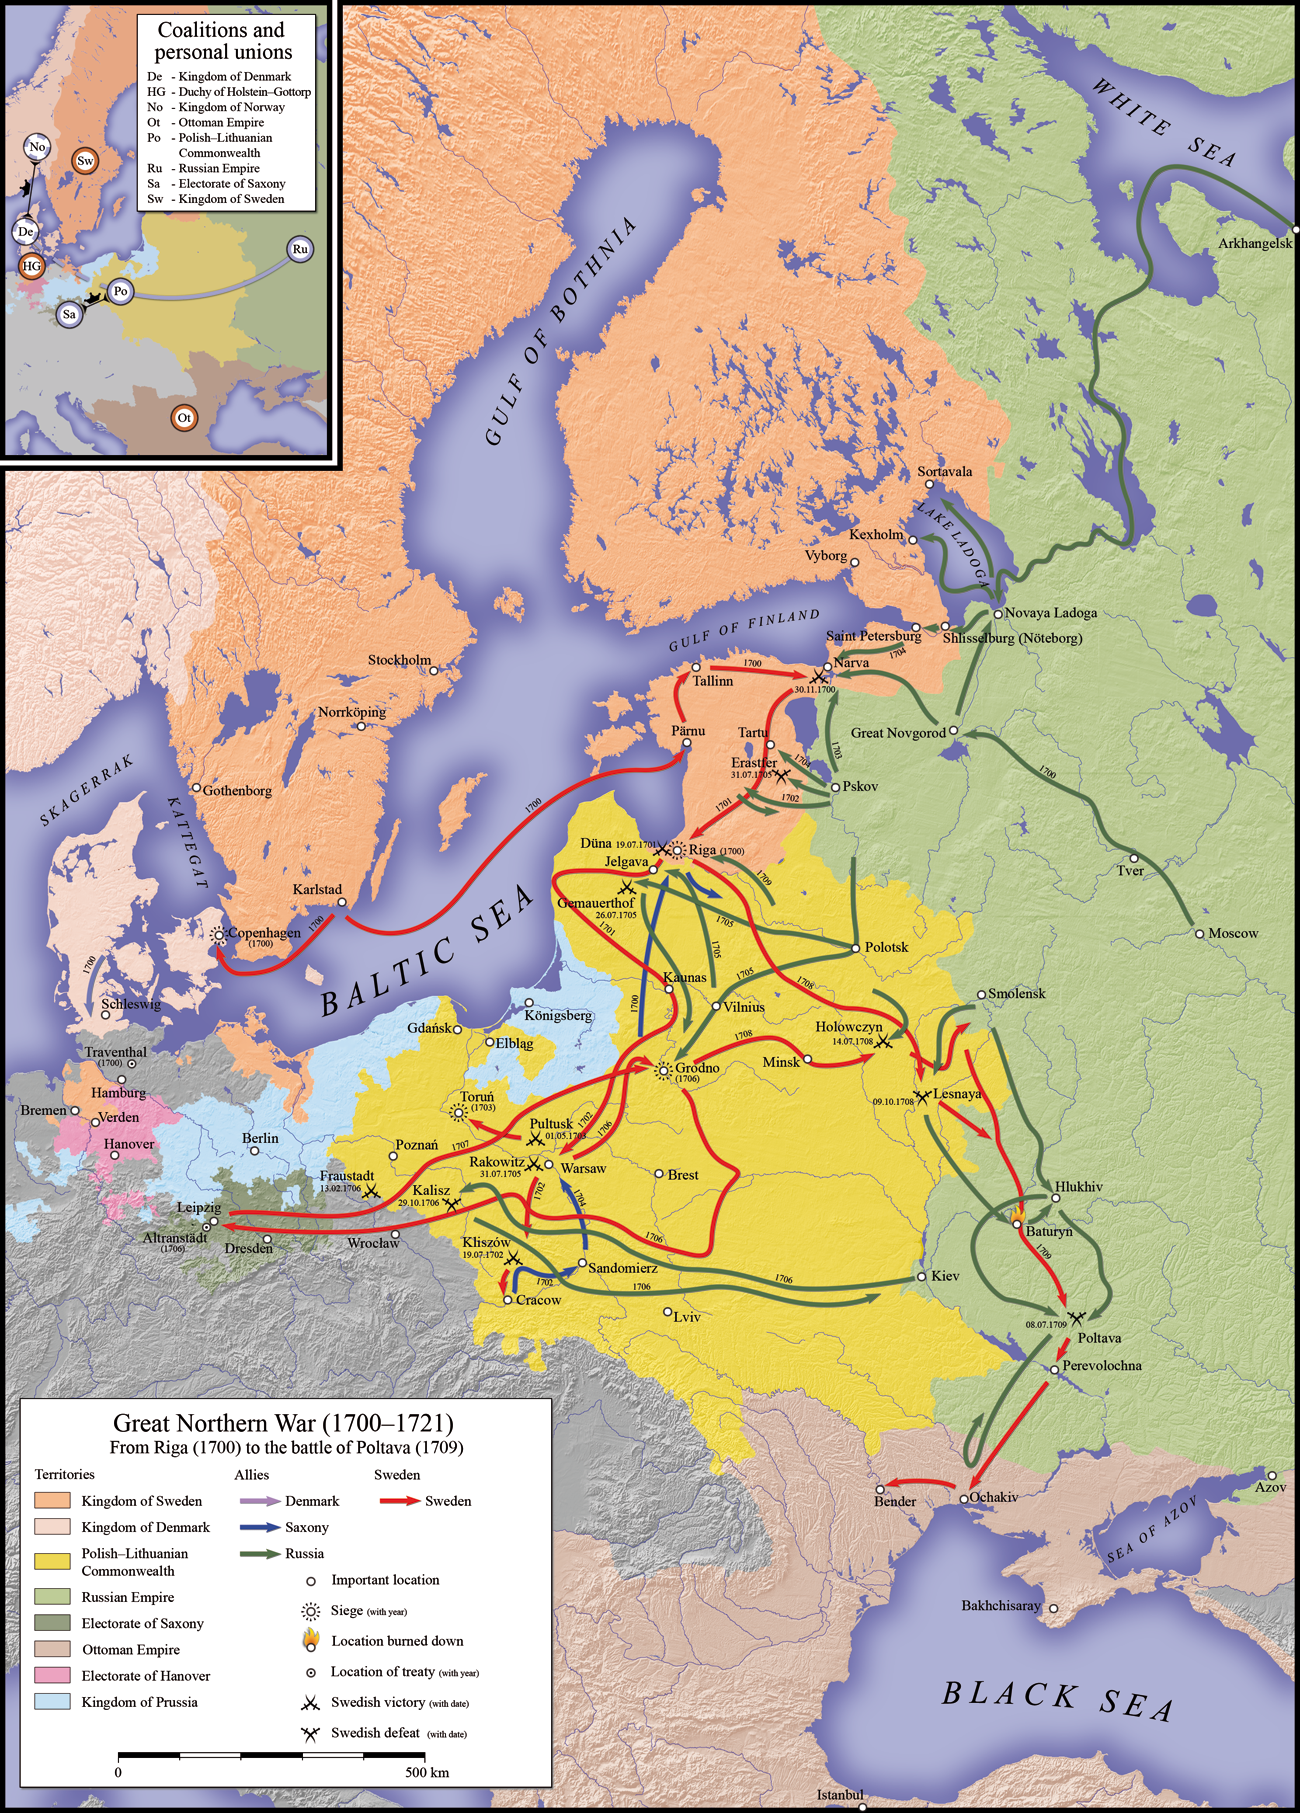 The Great Northern War in the Polish Lithuanian Commonwealth I